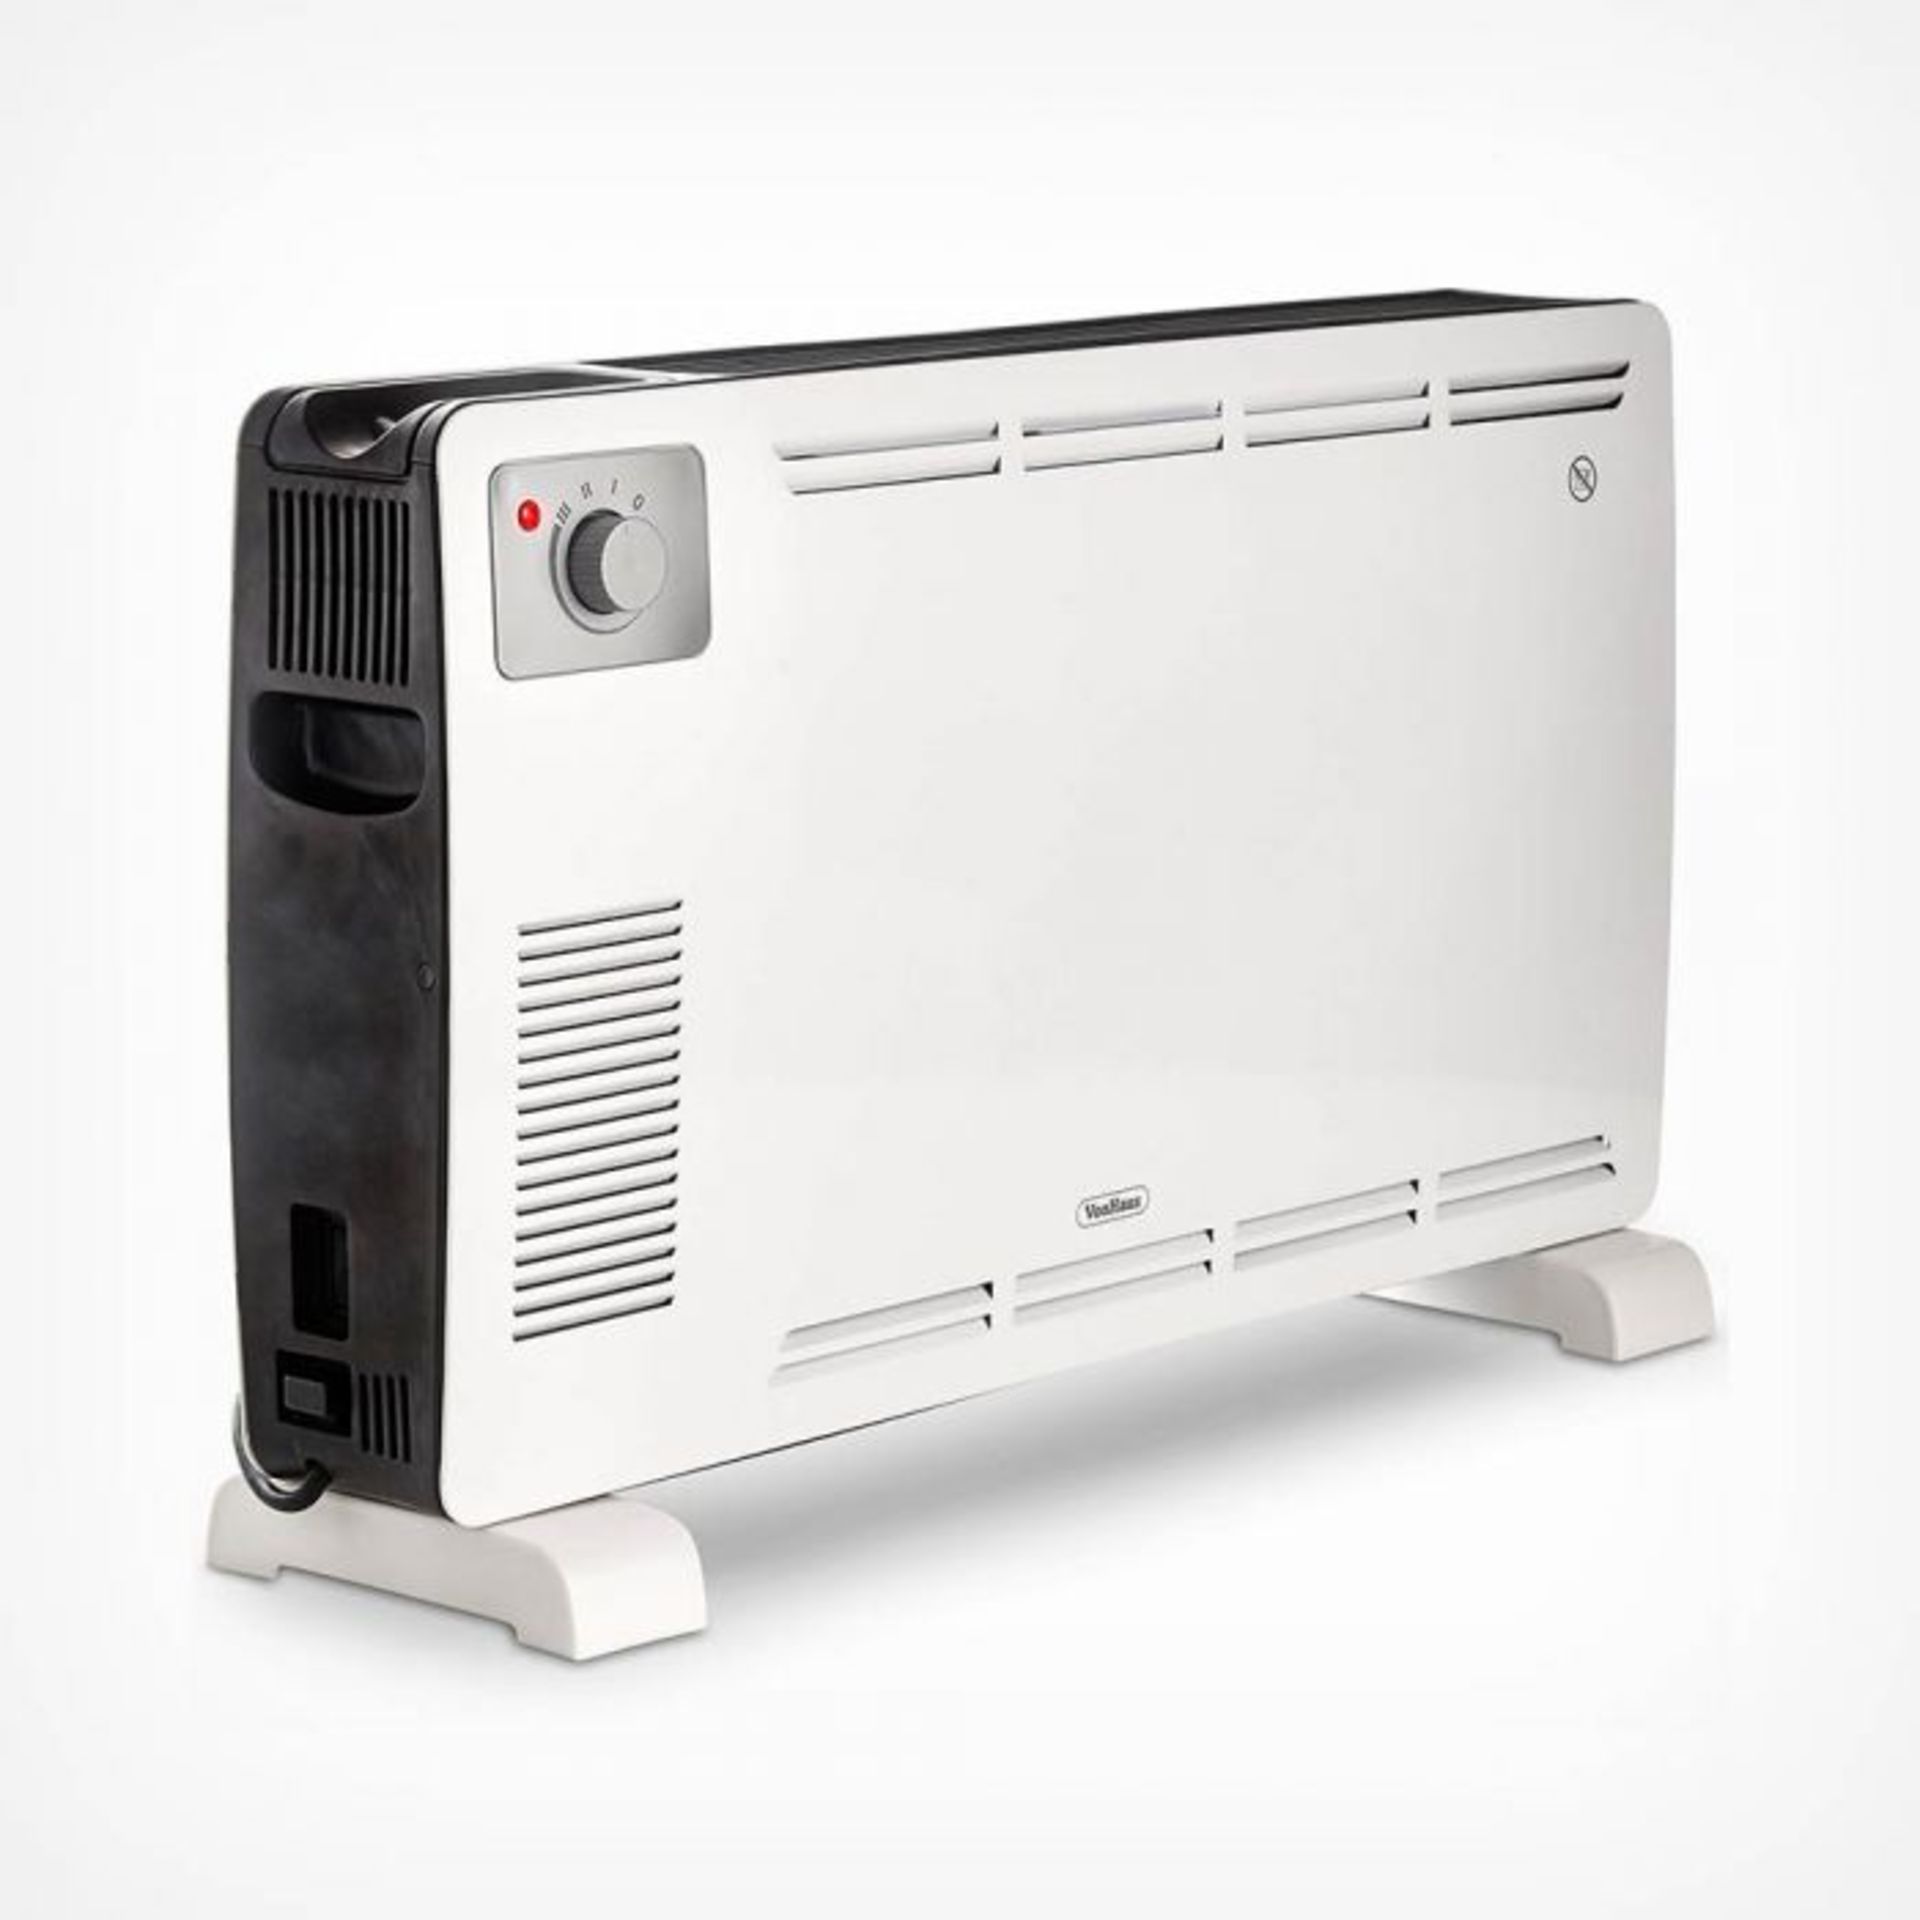 2200W Convector Heater - White. This convector heats up quickly thanks to convection technology. - Image 4 of 4